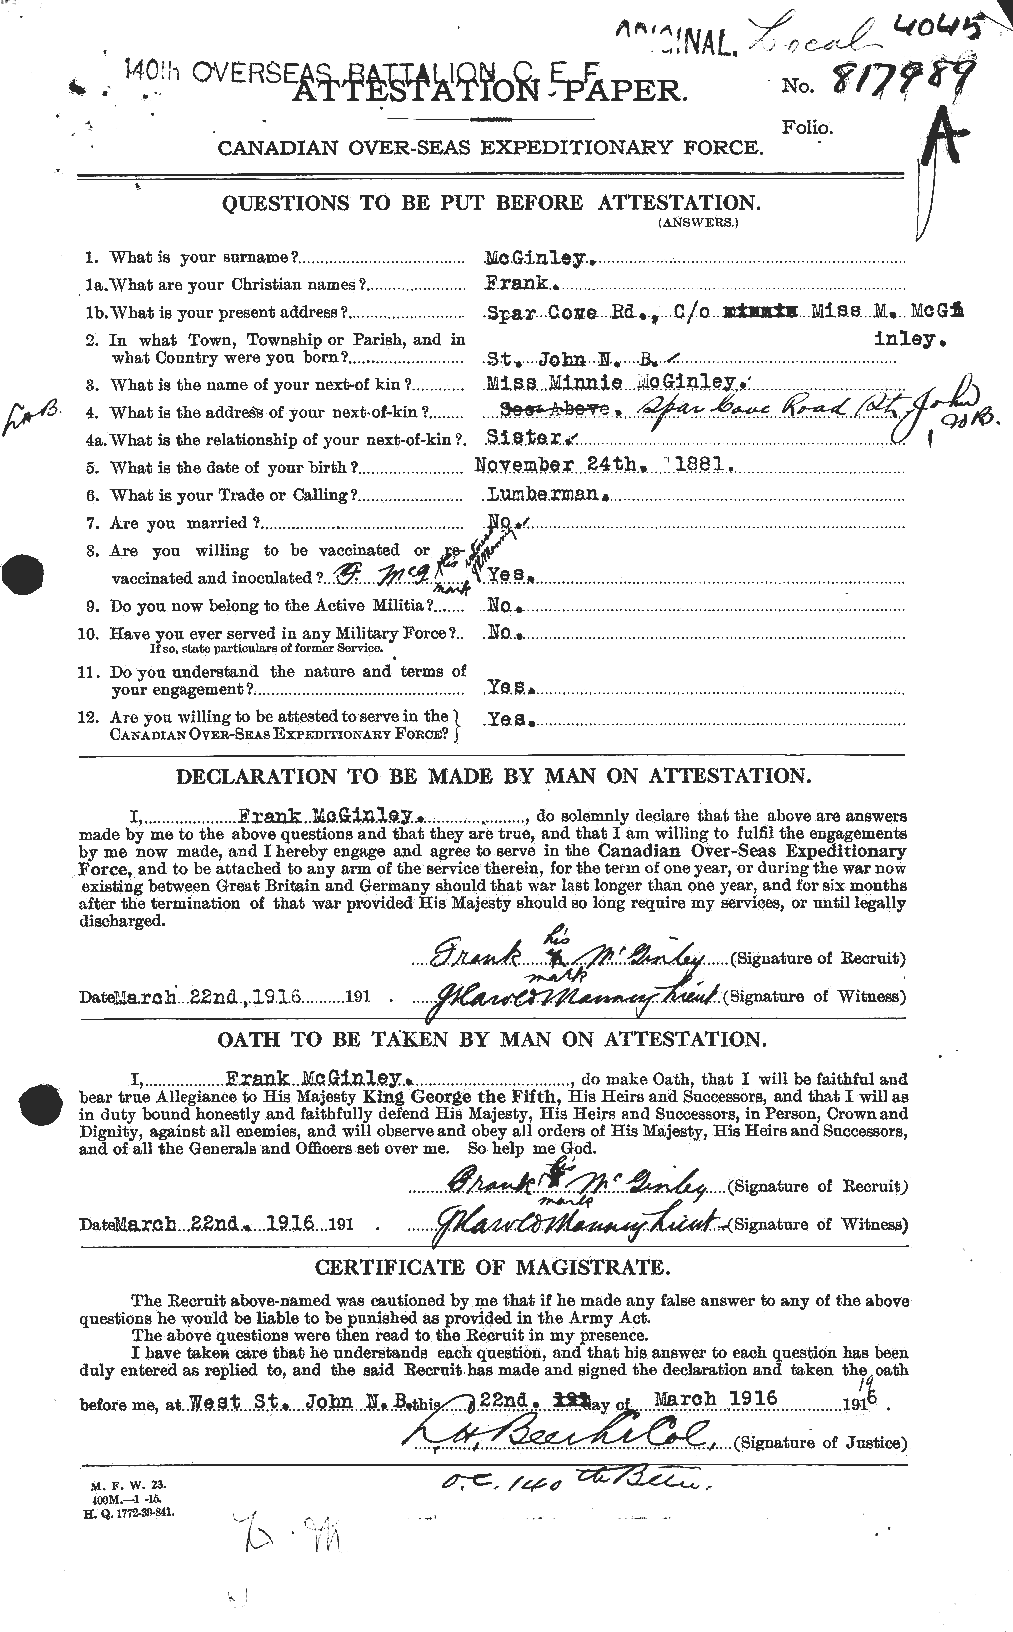 Personnel Records of the First World War - CEF 526313a